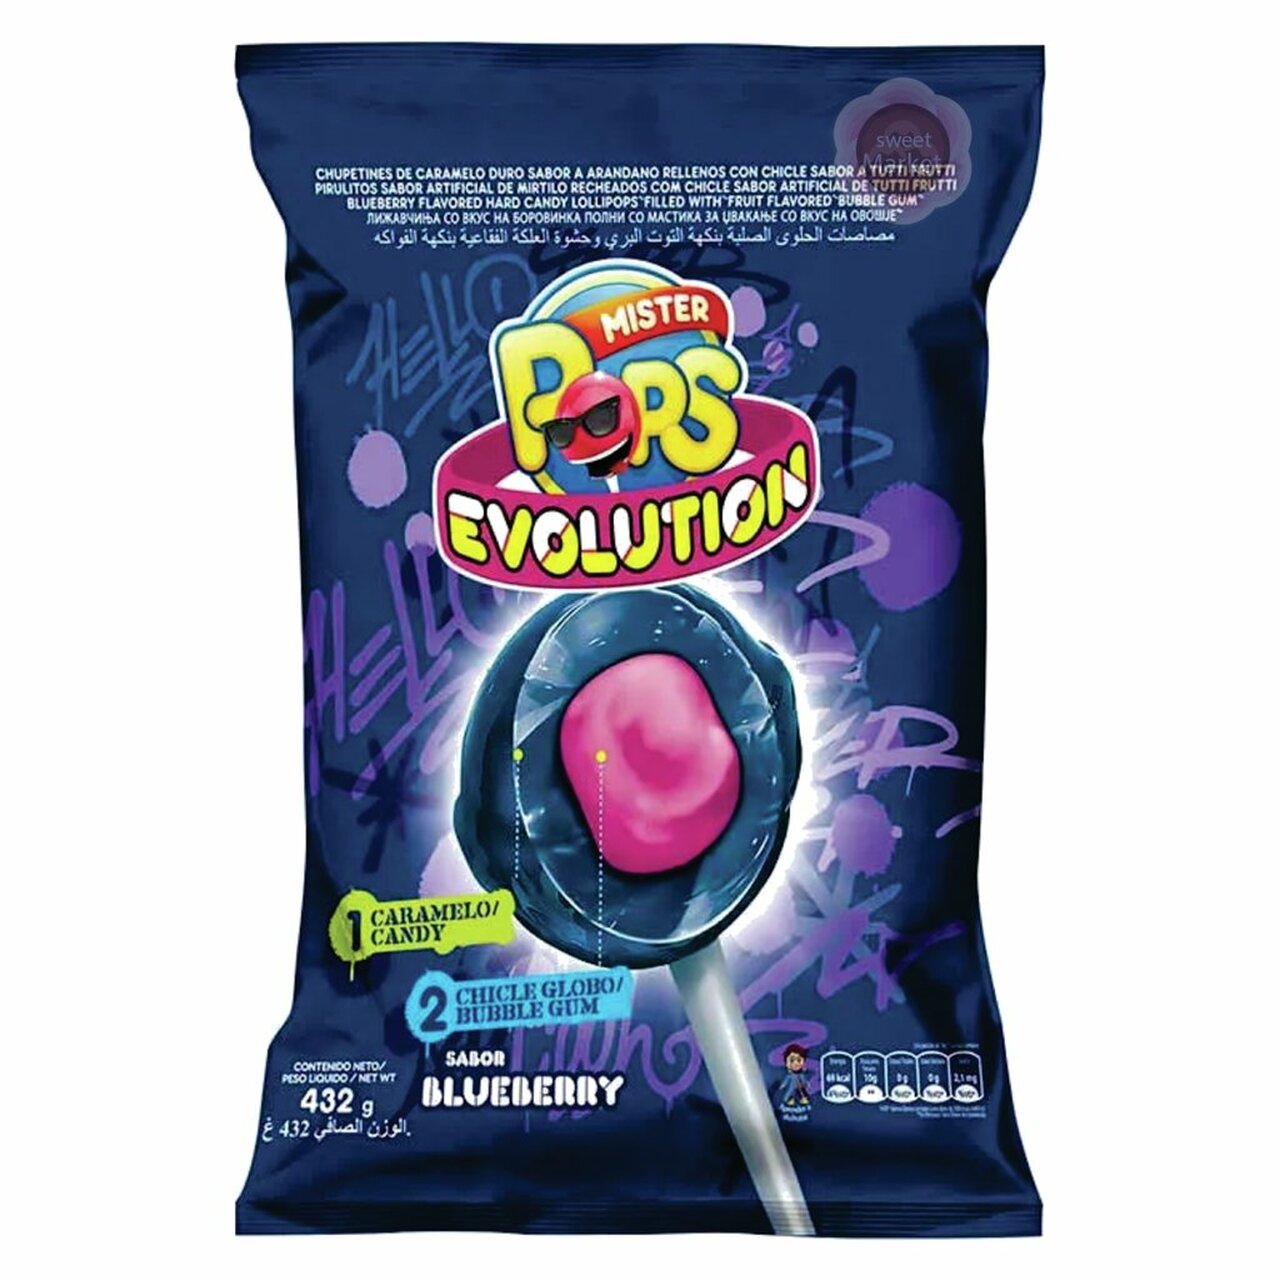 Chupetin Blueberry / Hard Candy lolipop with Gum Blueberry EVOLUTION- ( 432 gr 15.23Oz) San Telmo Market, Argentine Grocery & Restaurant, We Ship All Over USA and CANADA